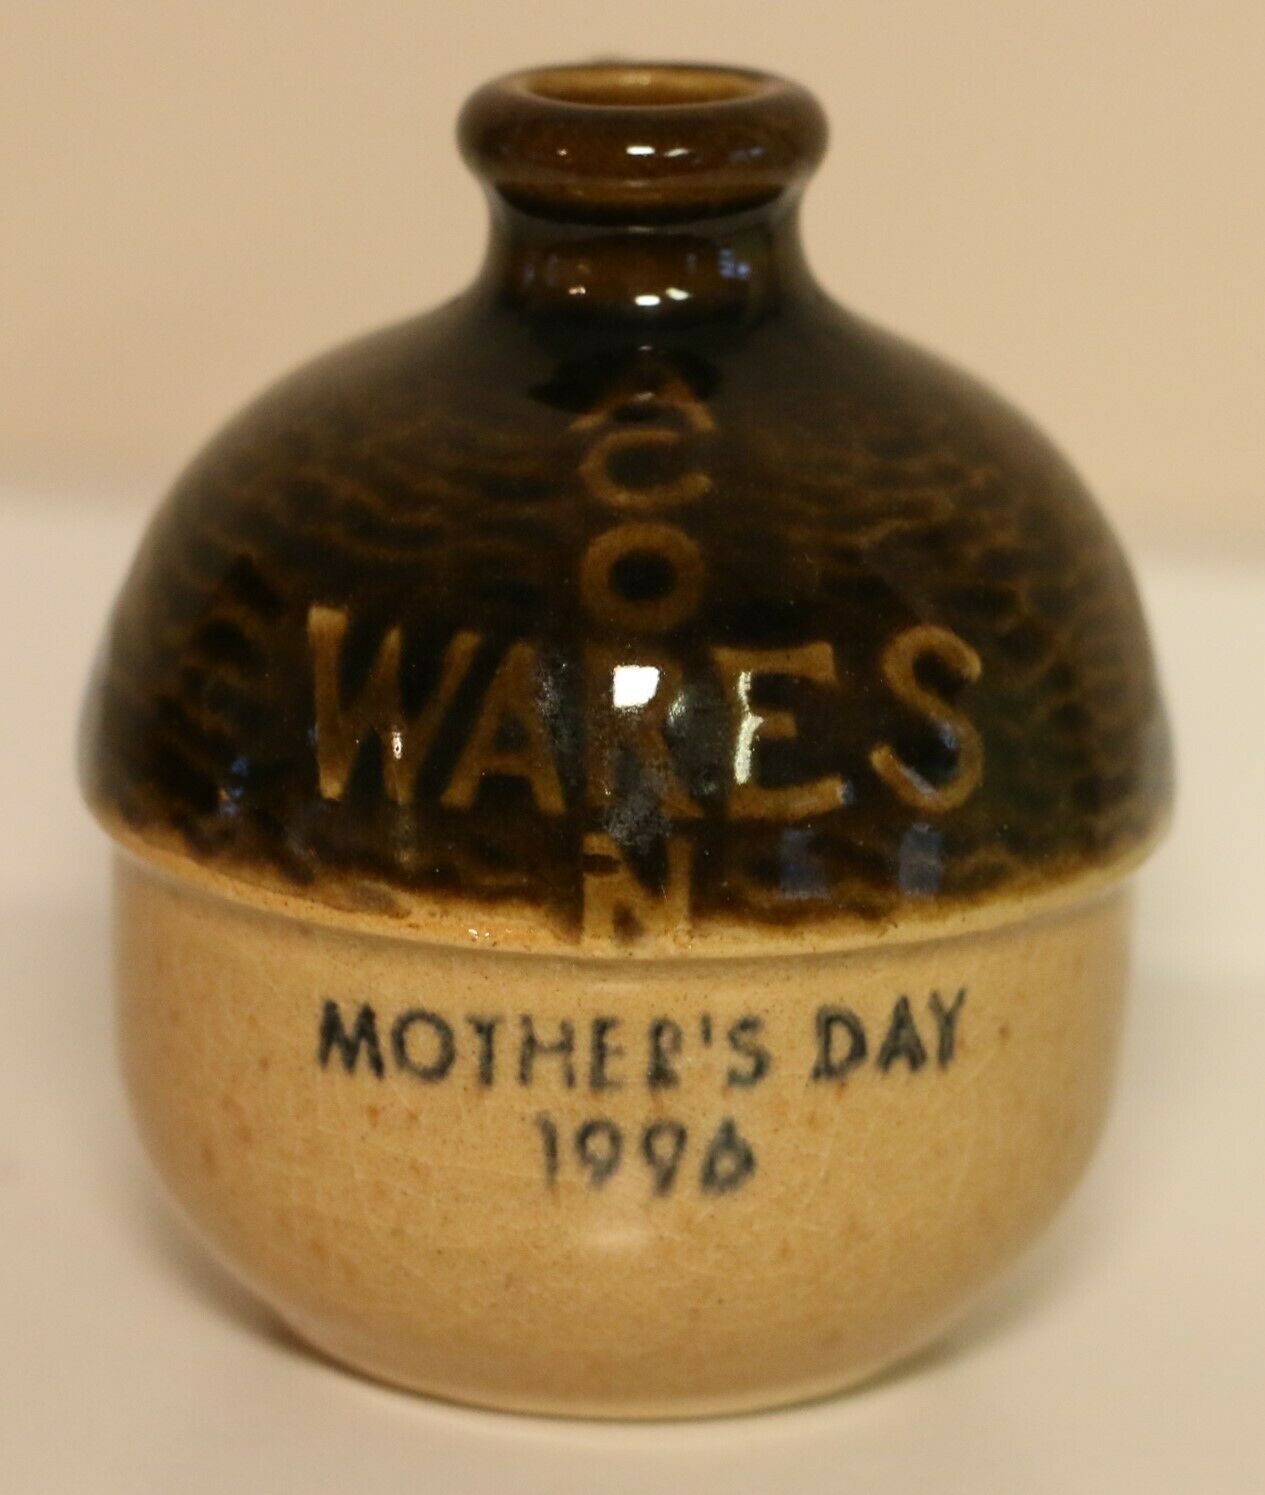 Uhl Pottery - 1996 Mother's Day - Acorn Wares Miniature Jug - Collector's Club